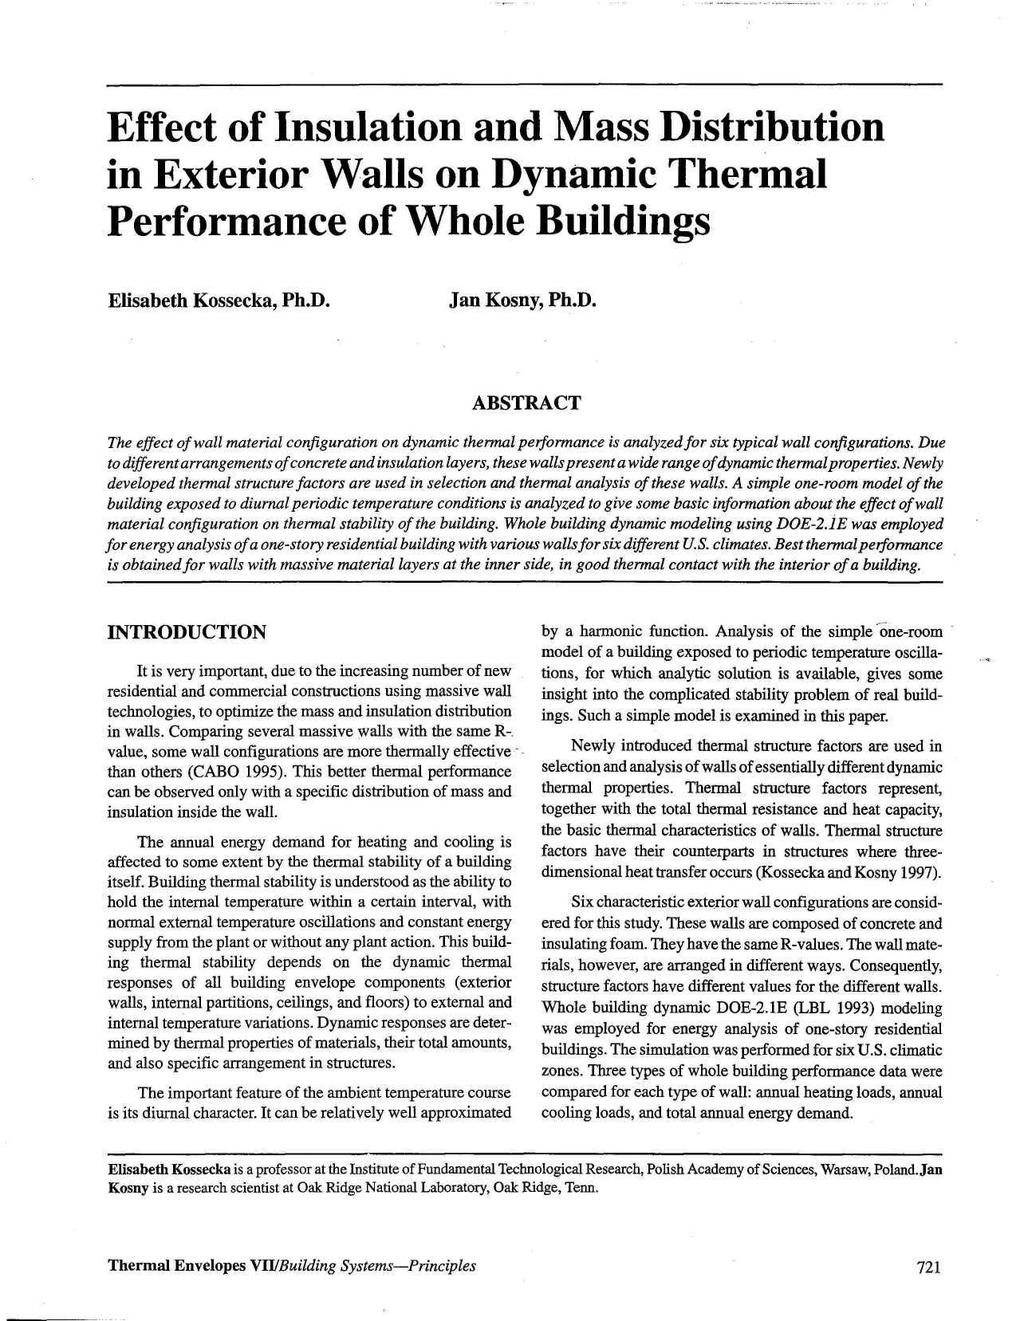 Effect of Insulation and Mass Distribution in Exterior Walls on Dynamic Thermal Performance of Whole Buildings Elisabeth Kossecka, Ph.D. Jan Kosny, Ph.D. ABSTRACT The effect of wall material configuration on dynamic thermal performance is analyzed for six typical wall configurations.